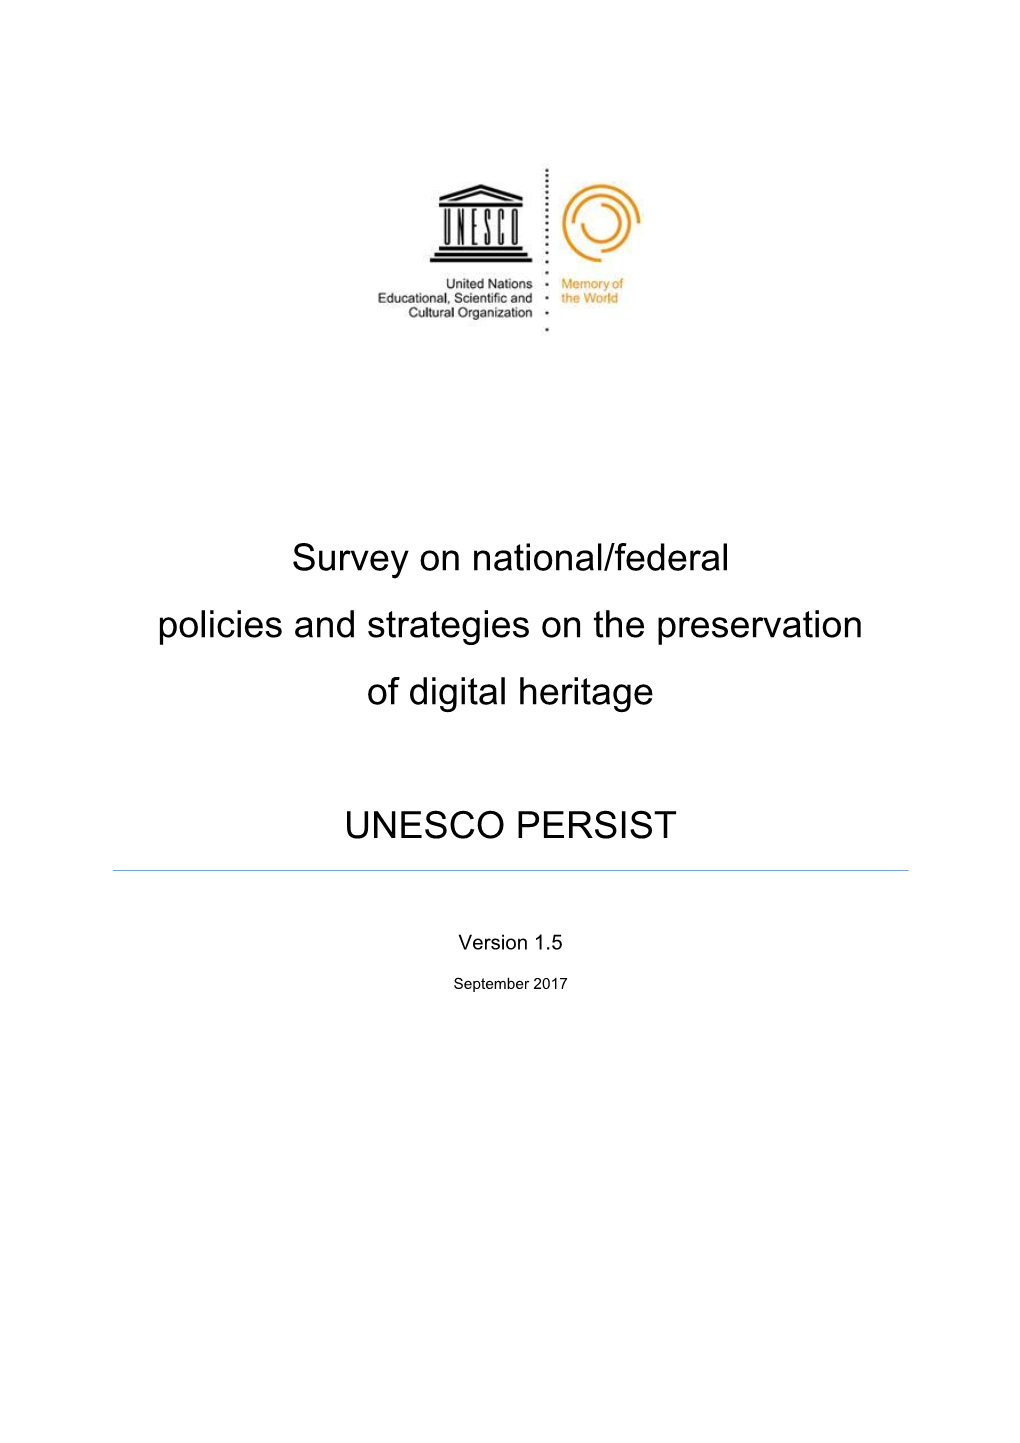 Survey on National/Federal Policies and Strategies on the Preservation of Digital Heritage